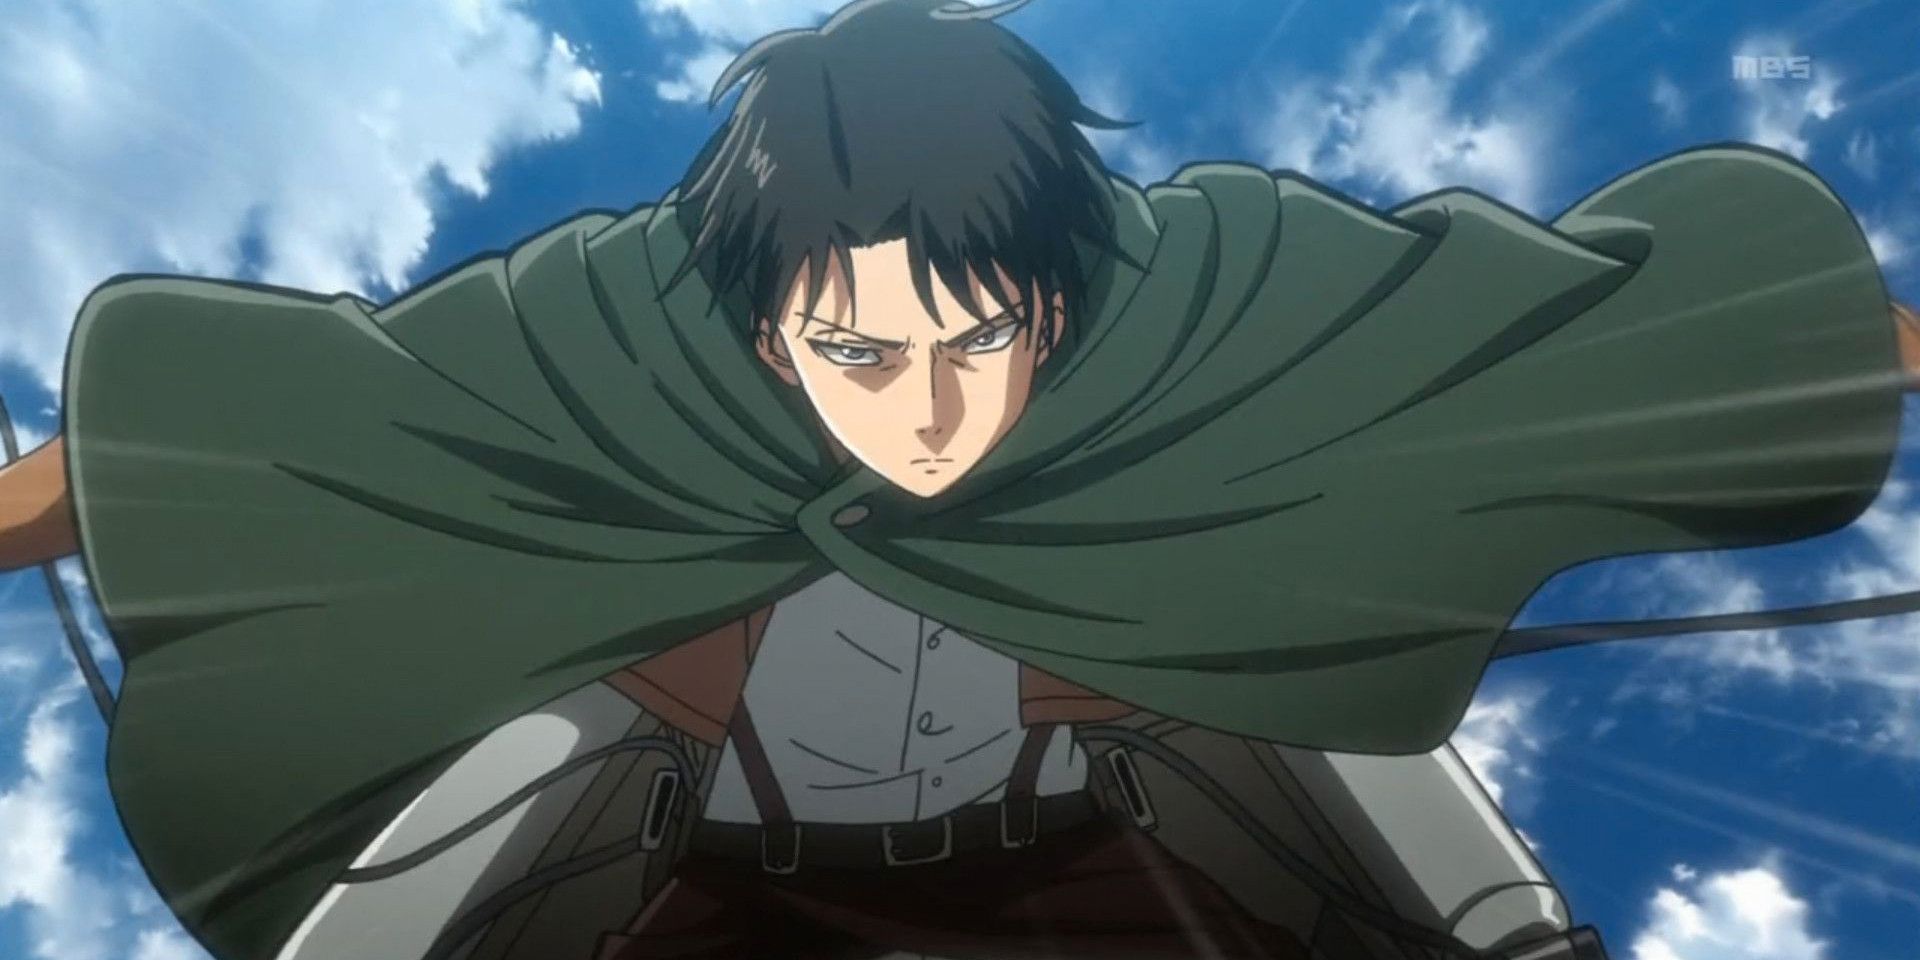 Levi Ackerman ready for battle in Attack On Titan.